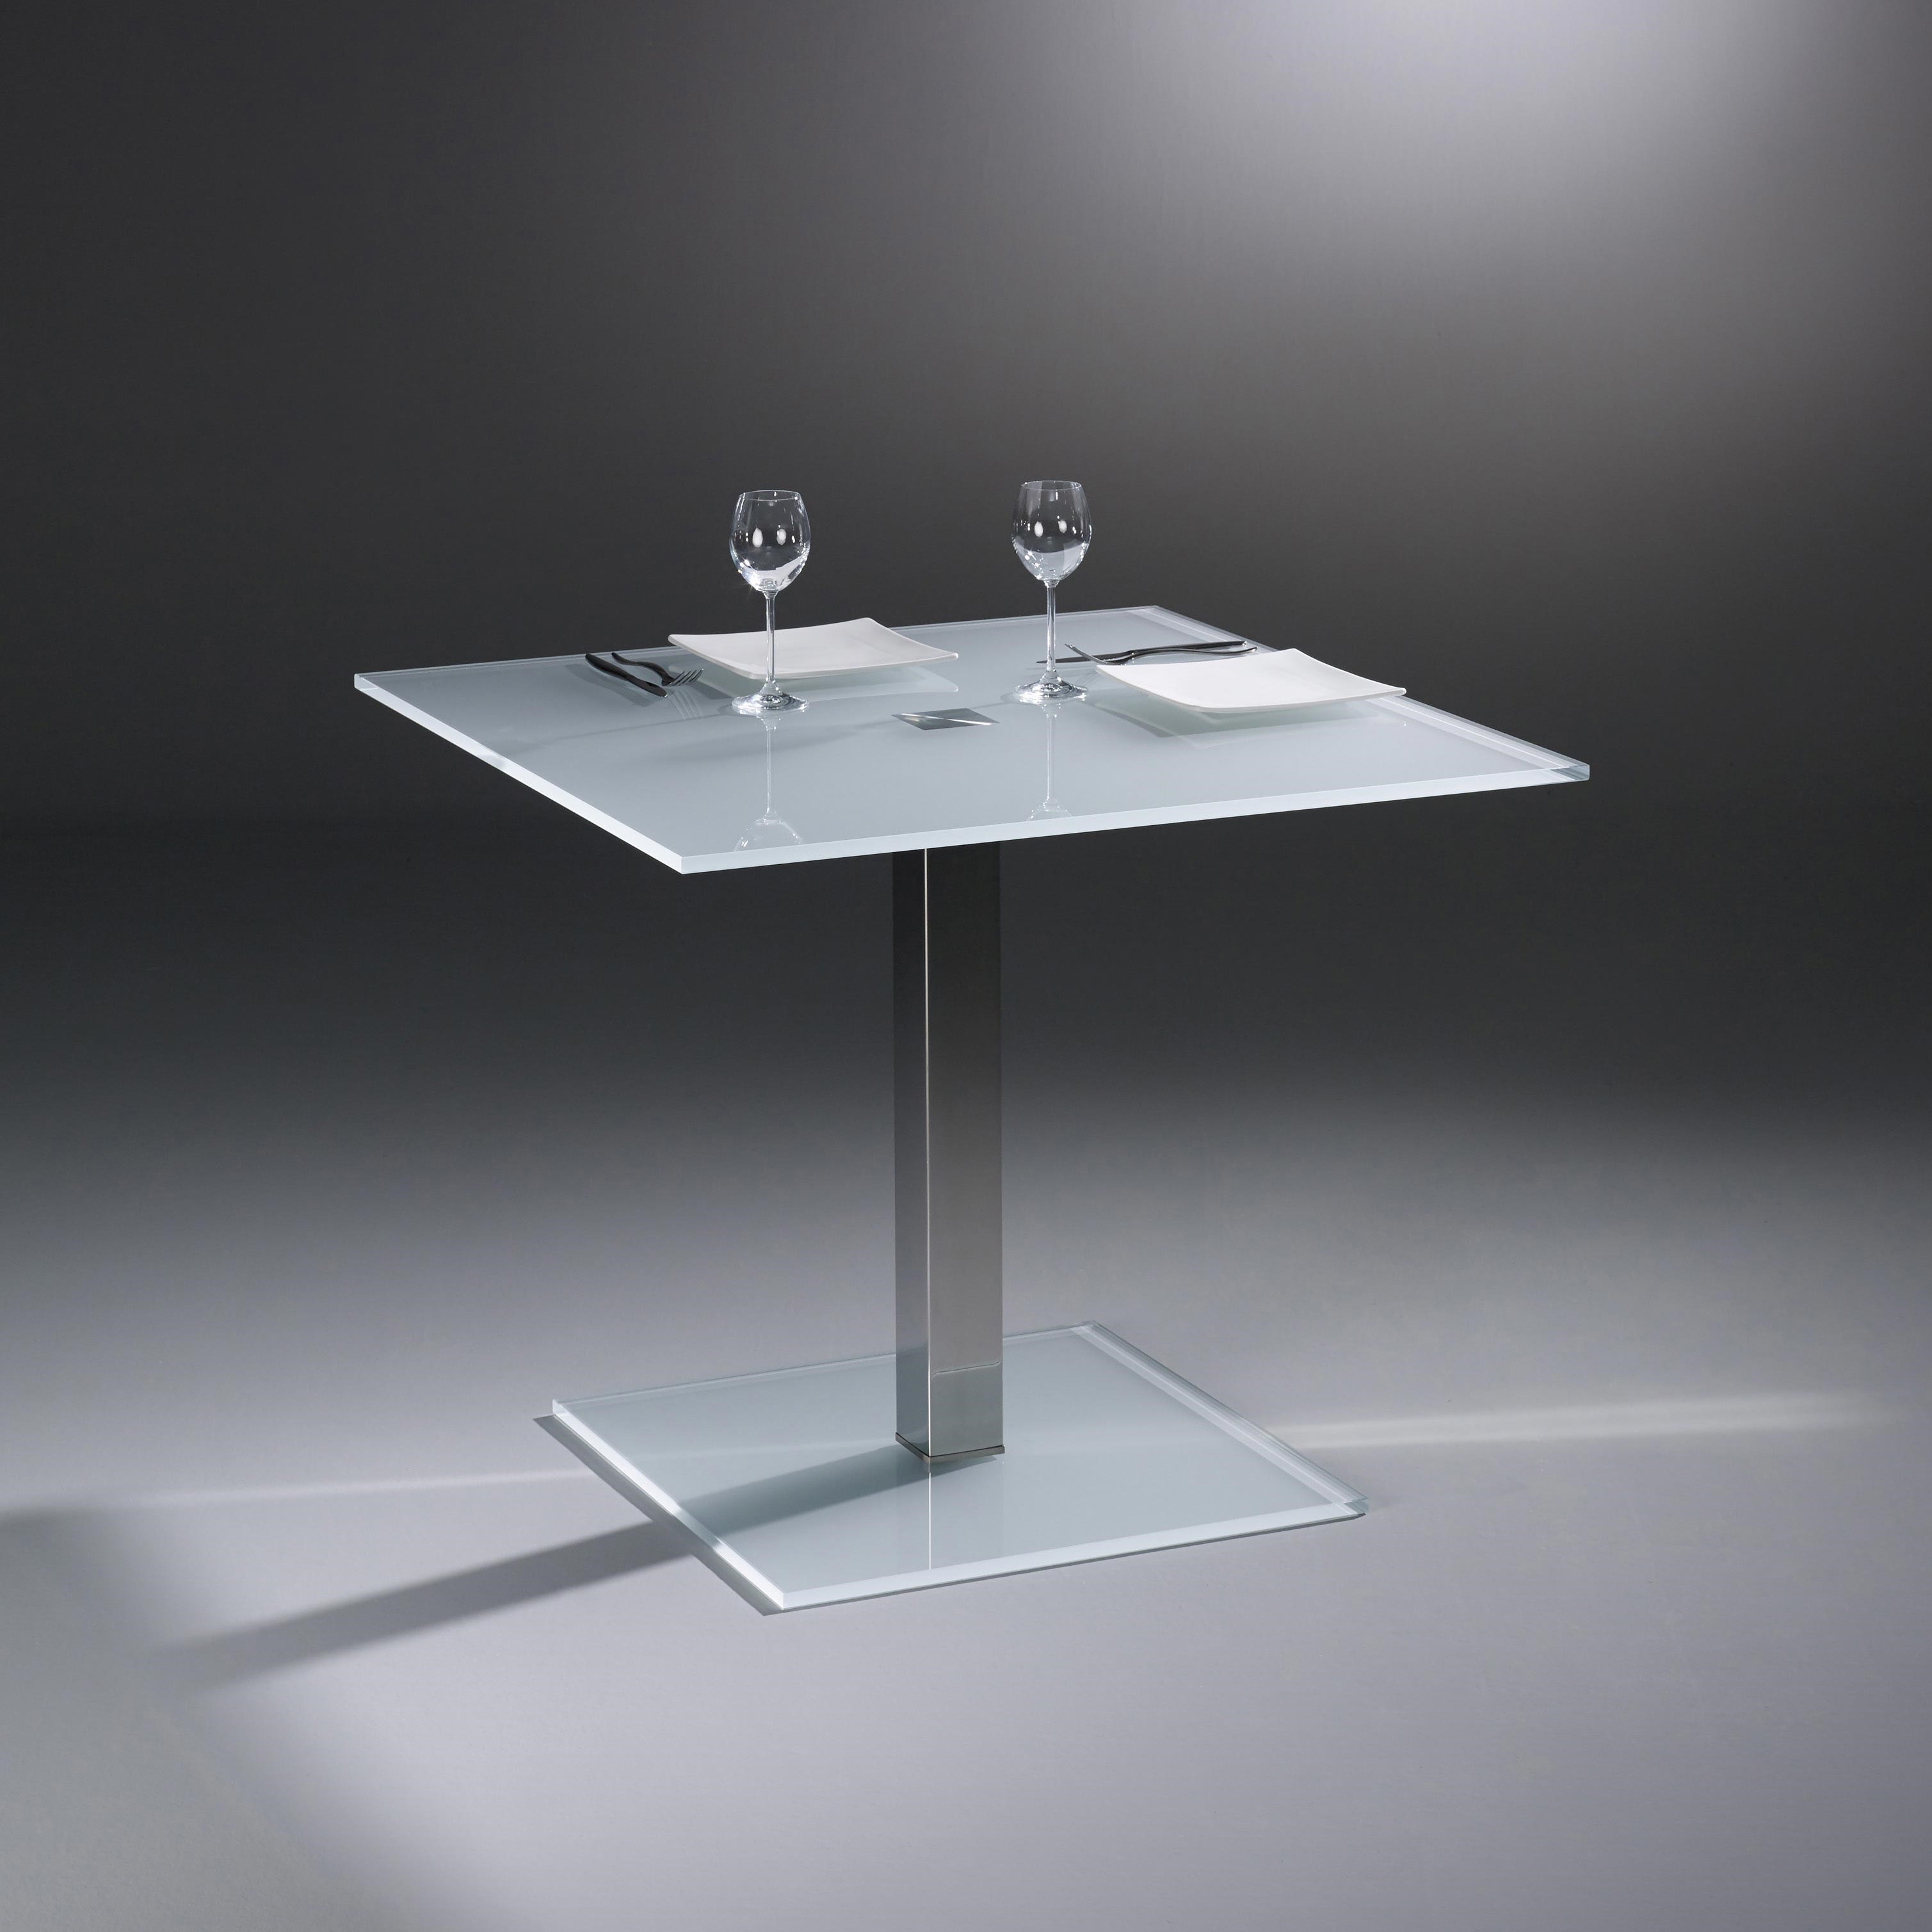 Glass table QUADRO SOLO by DREIECK DESIGN: QS 9974 - OPTIWHITE satinated - table feet stainless steel polished